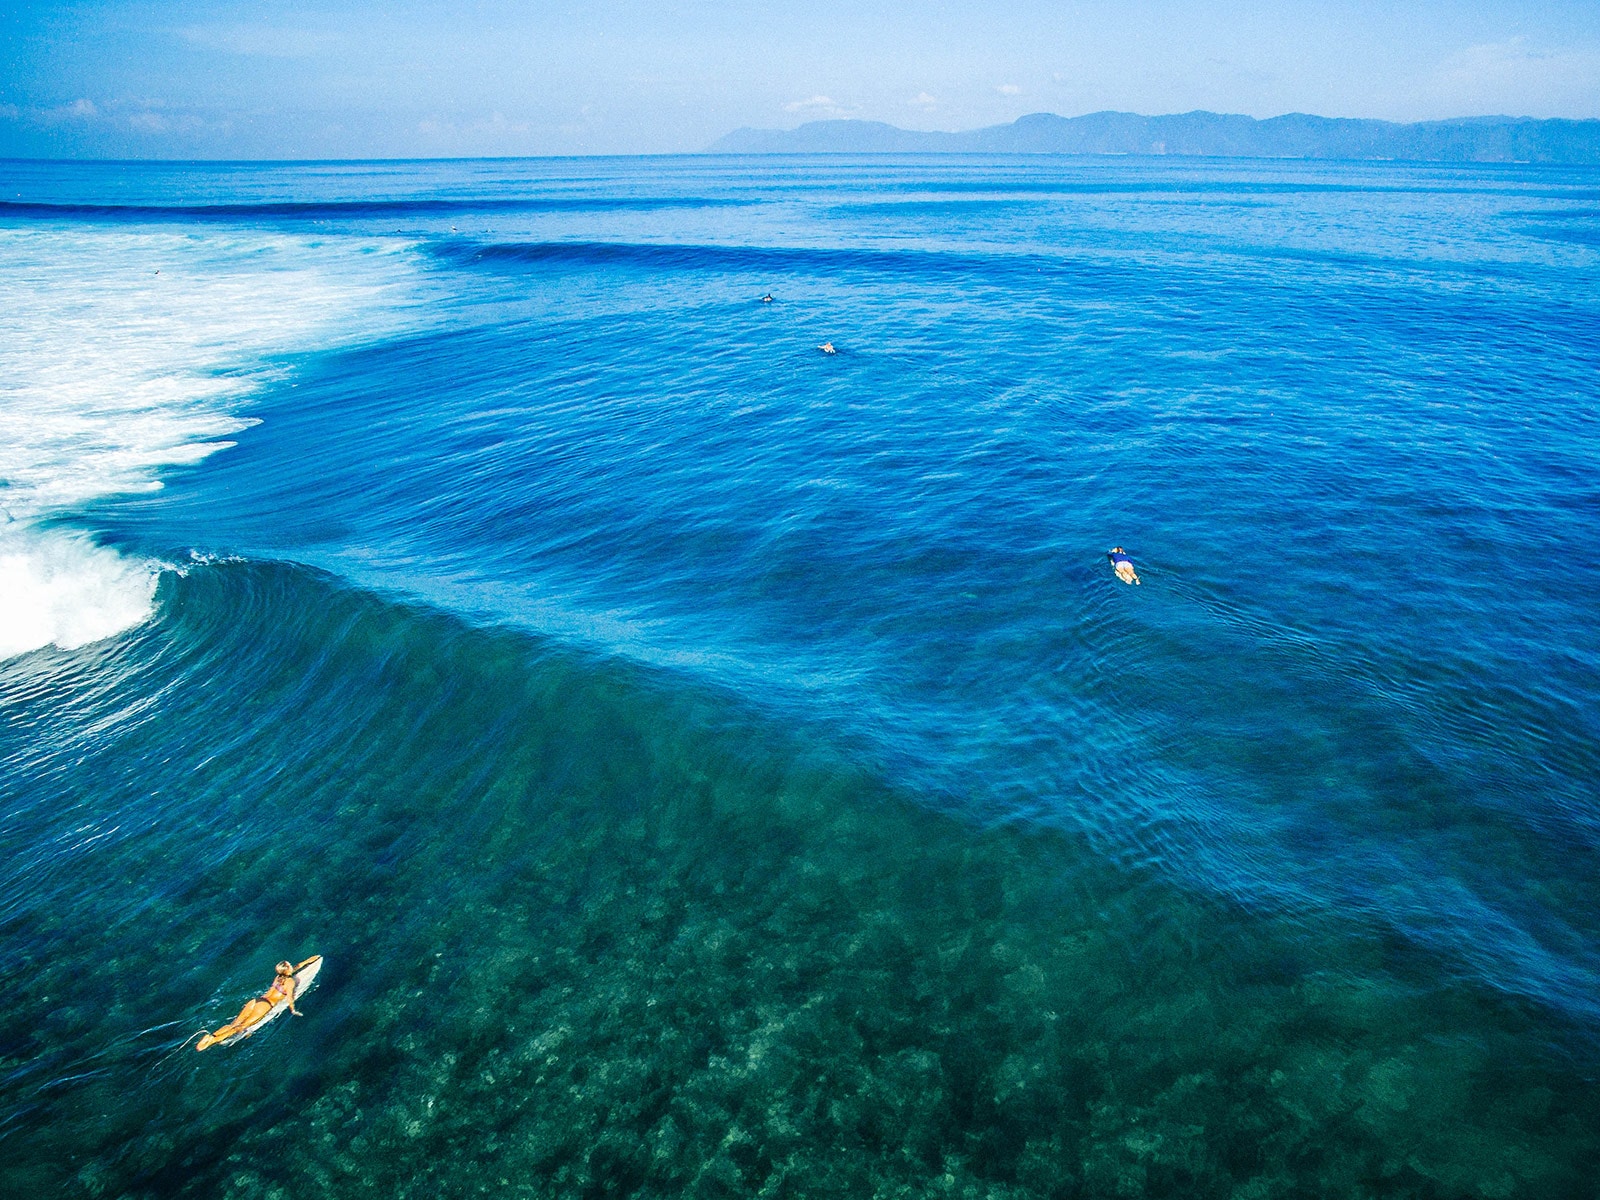 Female surfer paddling out over a reef break with clean groundswell waves